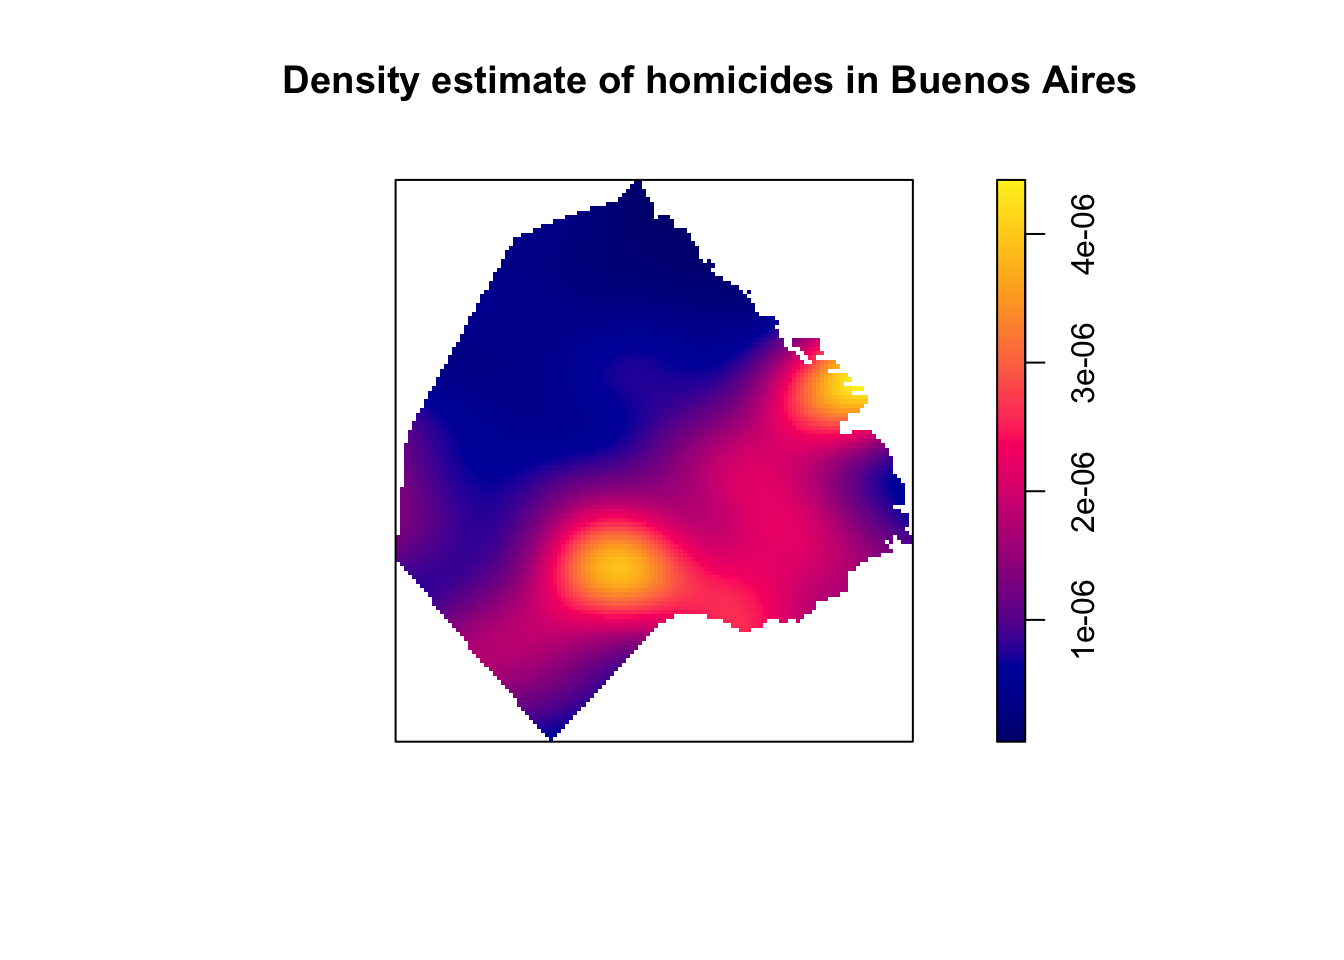 A shaded map of Buenos Aires, with the title 'Density estimate of homicides in Buenos Aires'. To the right, a legend matches a gradient from dark blue to purple to yellow, to values from zero to slightly more. The region of Buenos Aires is mostly dark blue in the north. Two yellow areas appear, one in the south, and one in the east. The area between them and further southwest is purple.